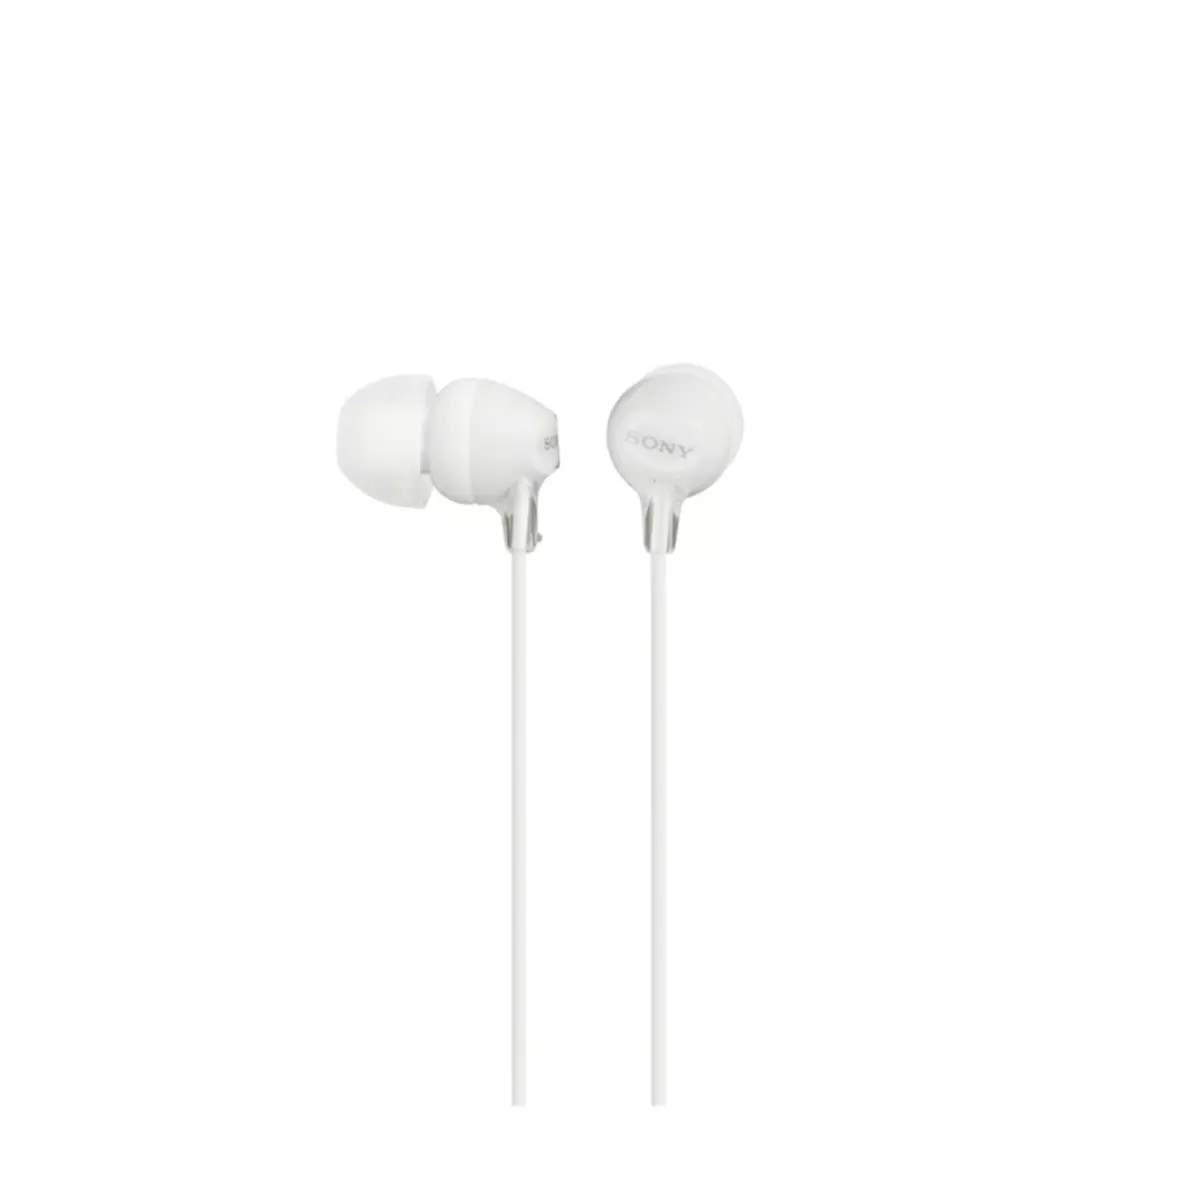 SONY Ecouteurs - Blanc - MDR-EX15 APX